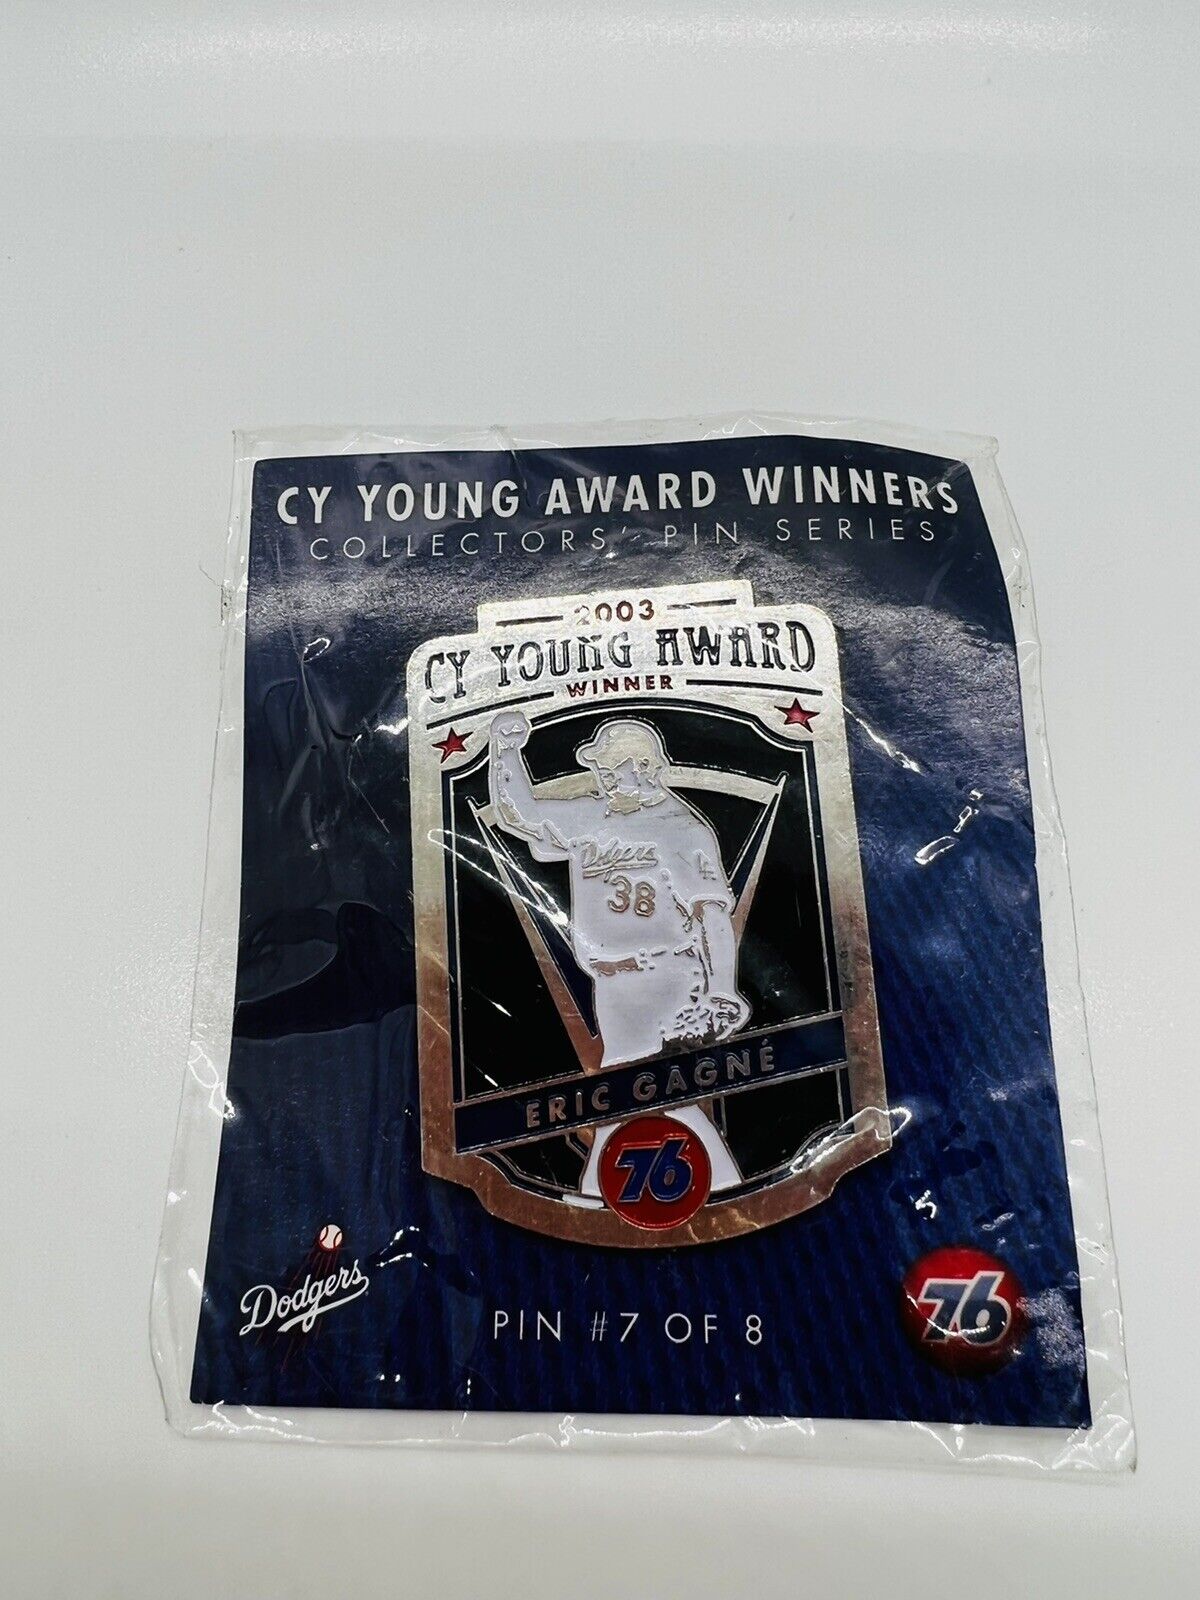 2015 Los Angeles Dodgers Eric Gagne Cy Young Pin SGA (7 of 8) New